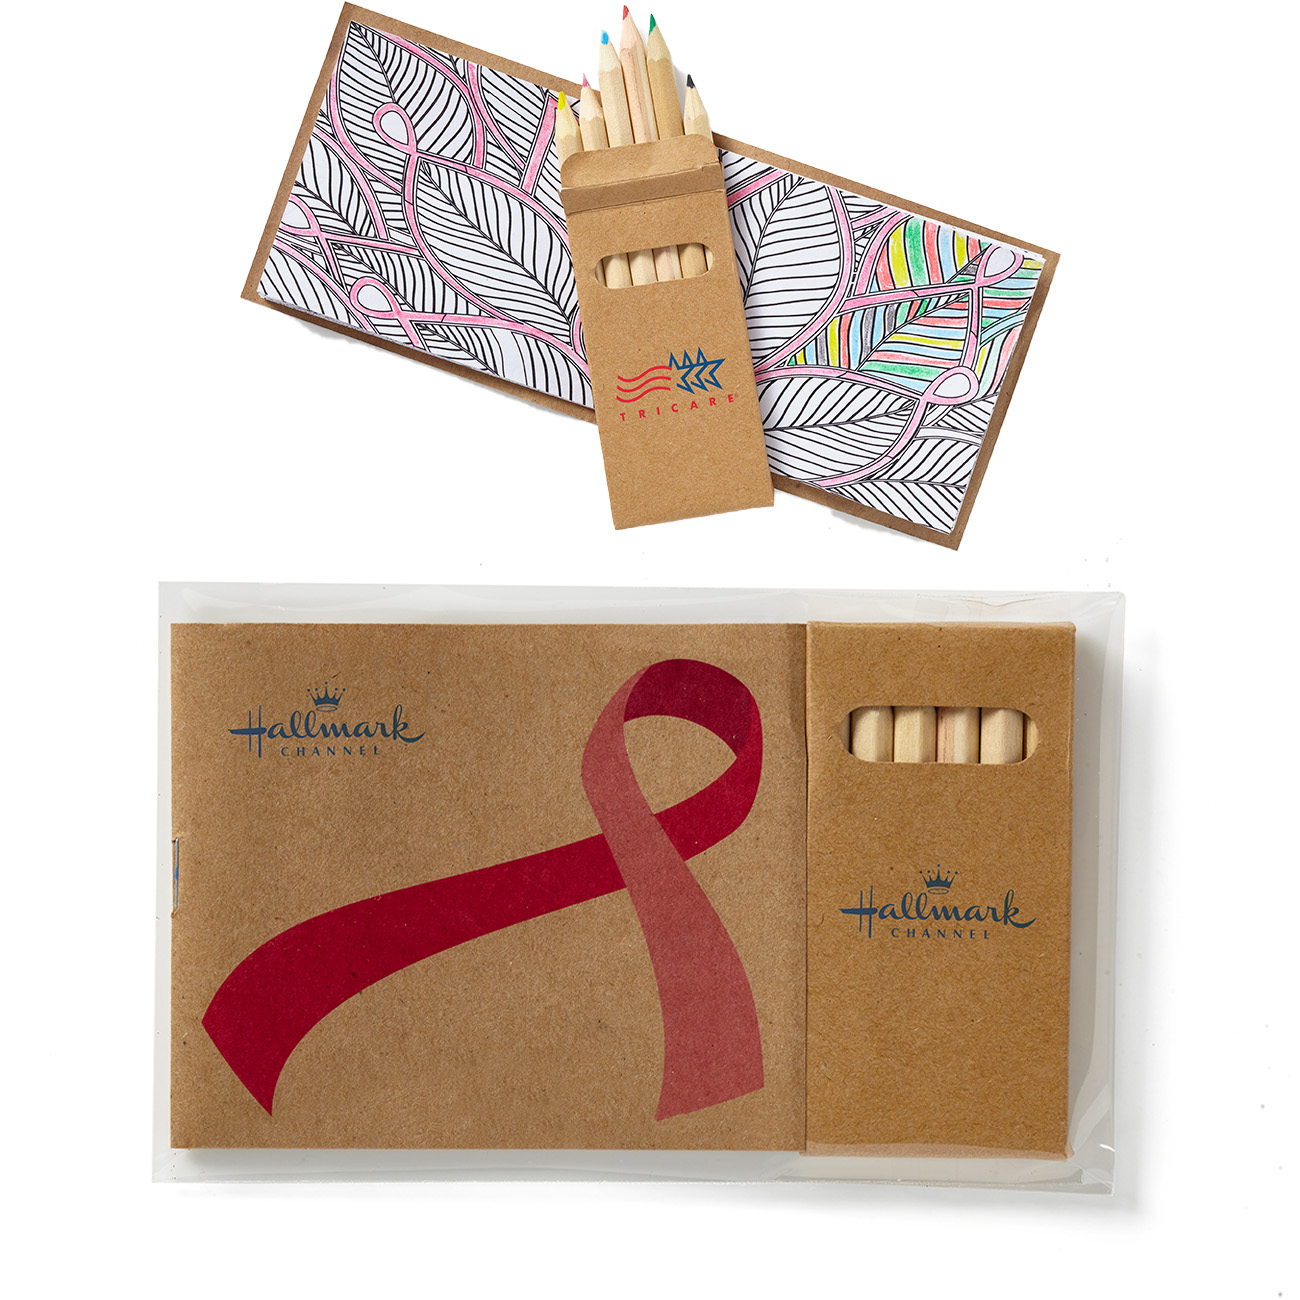 adult coloring book set with pink ribbon logo on packaging